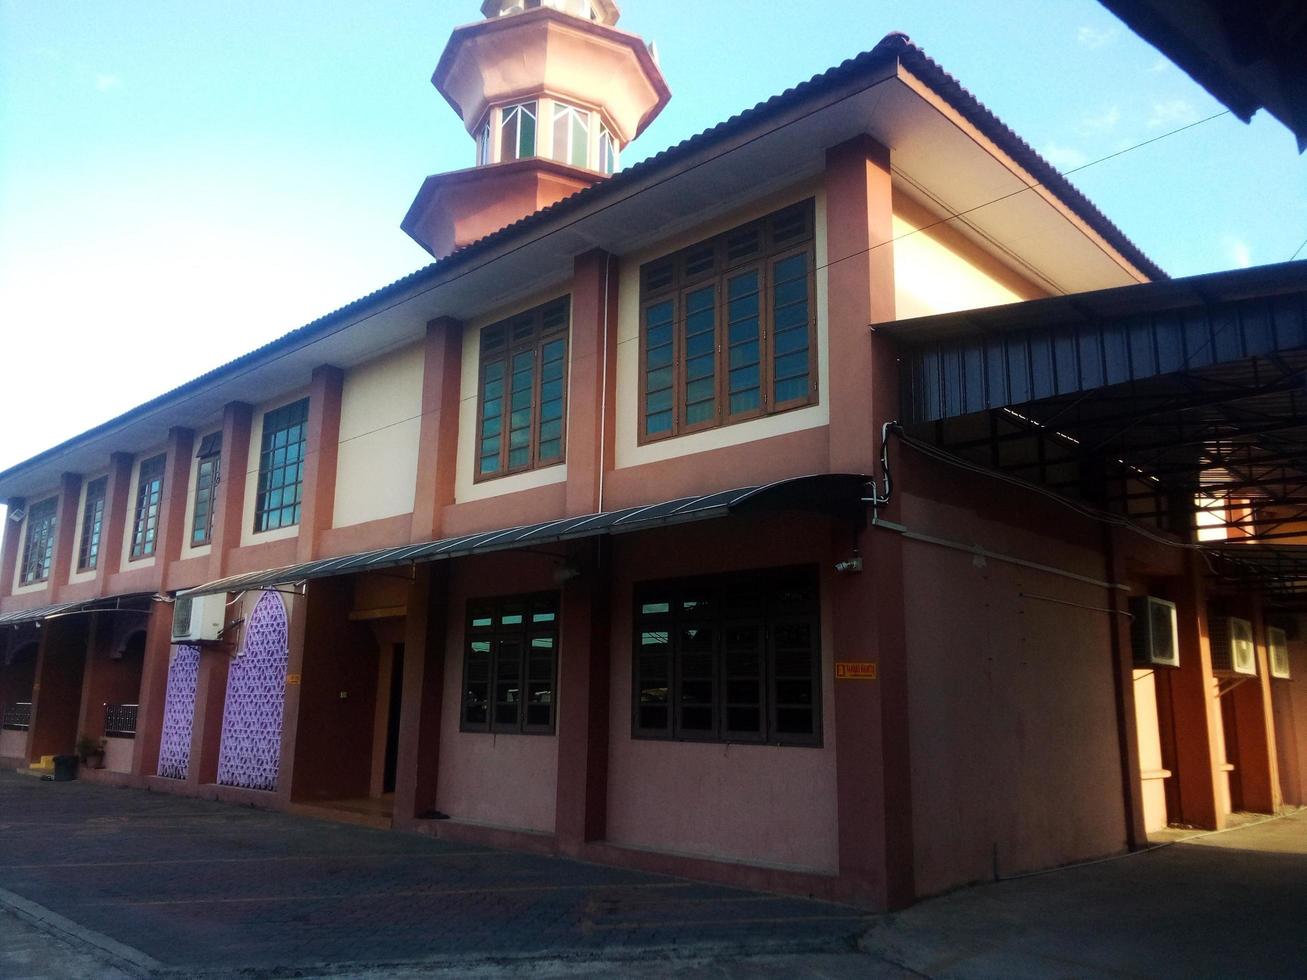 Masjid Batu 8 is a brown-colored mosque with a modest architecture. photo